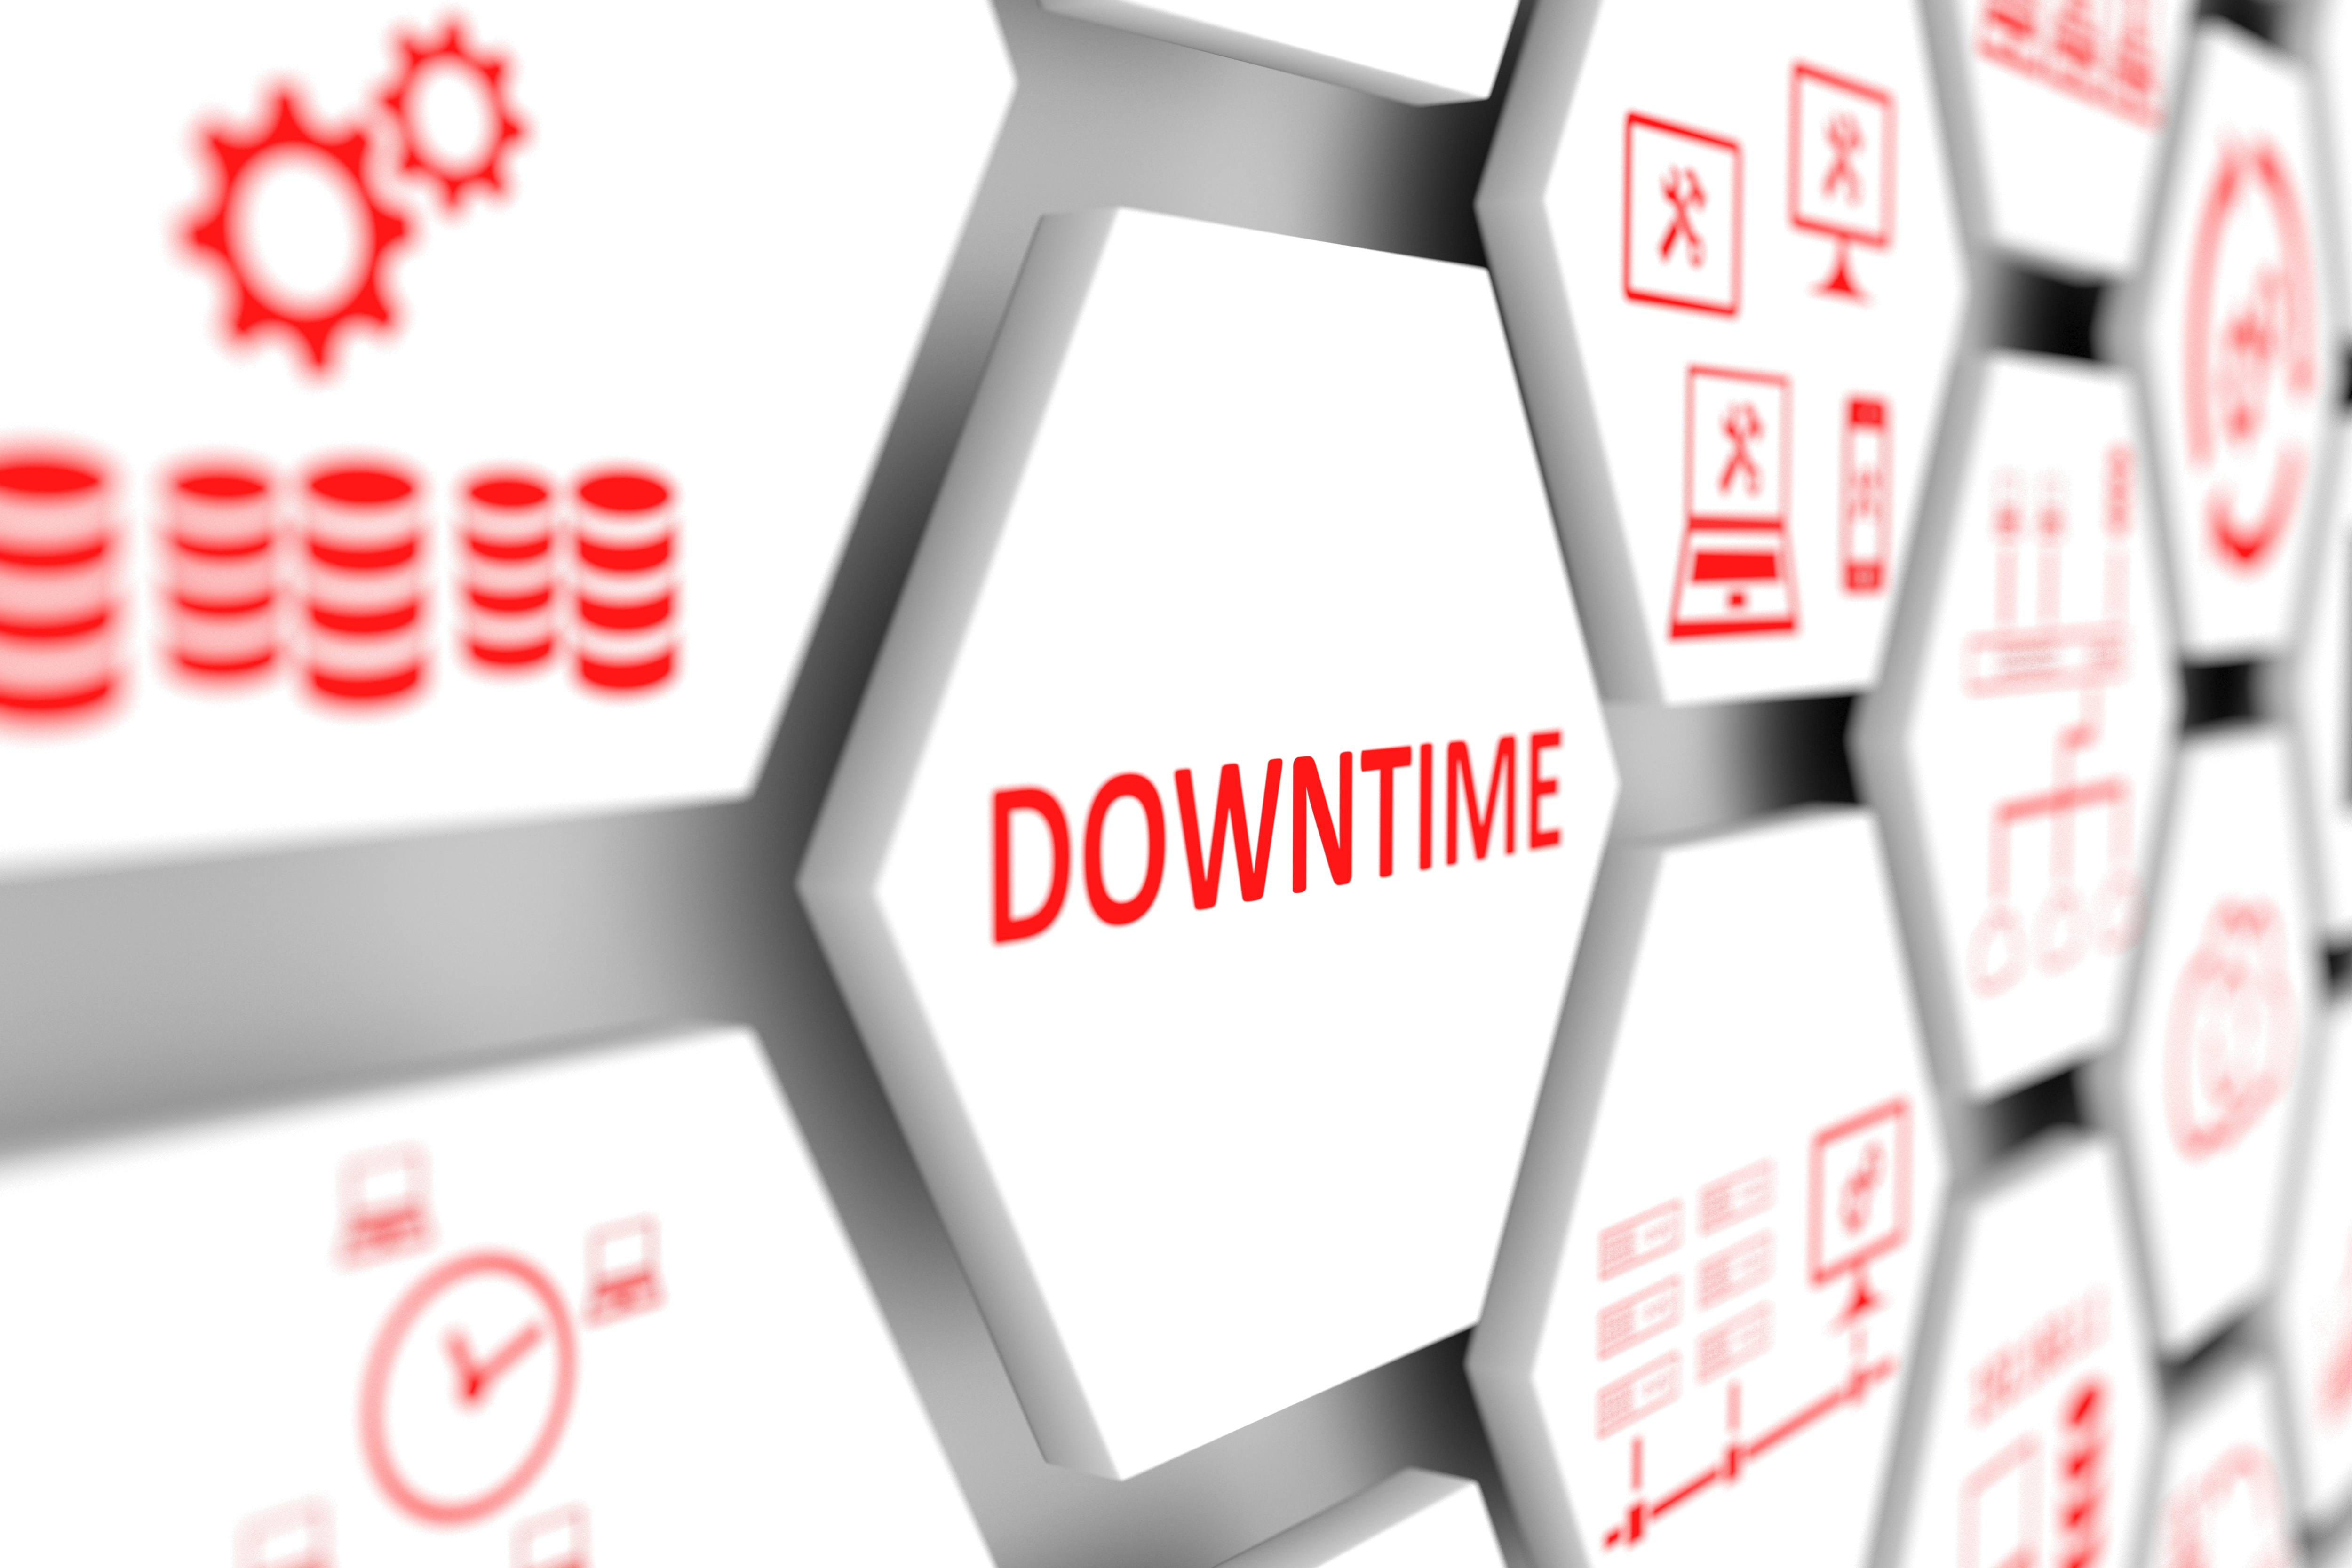 How to reduce downtime